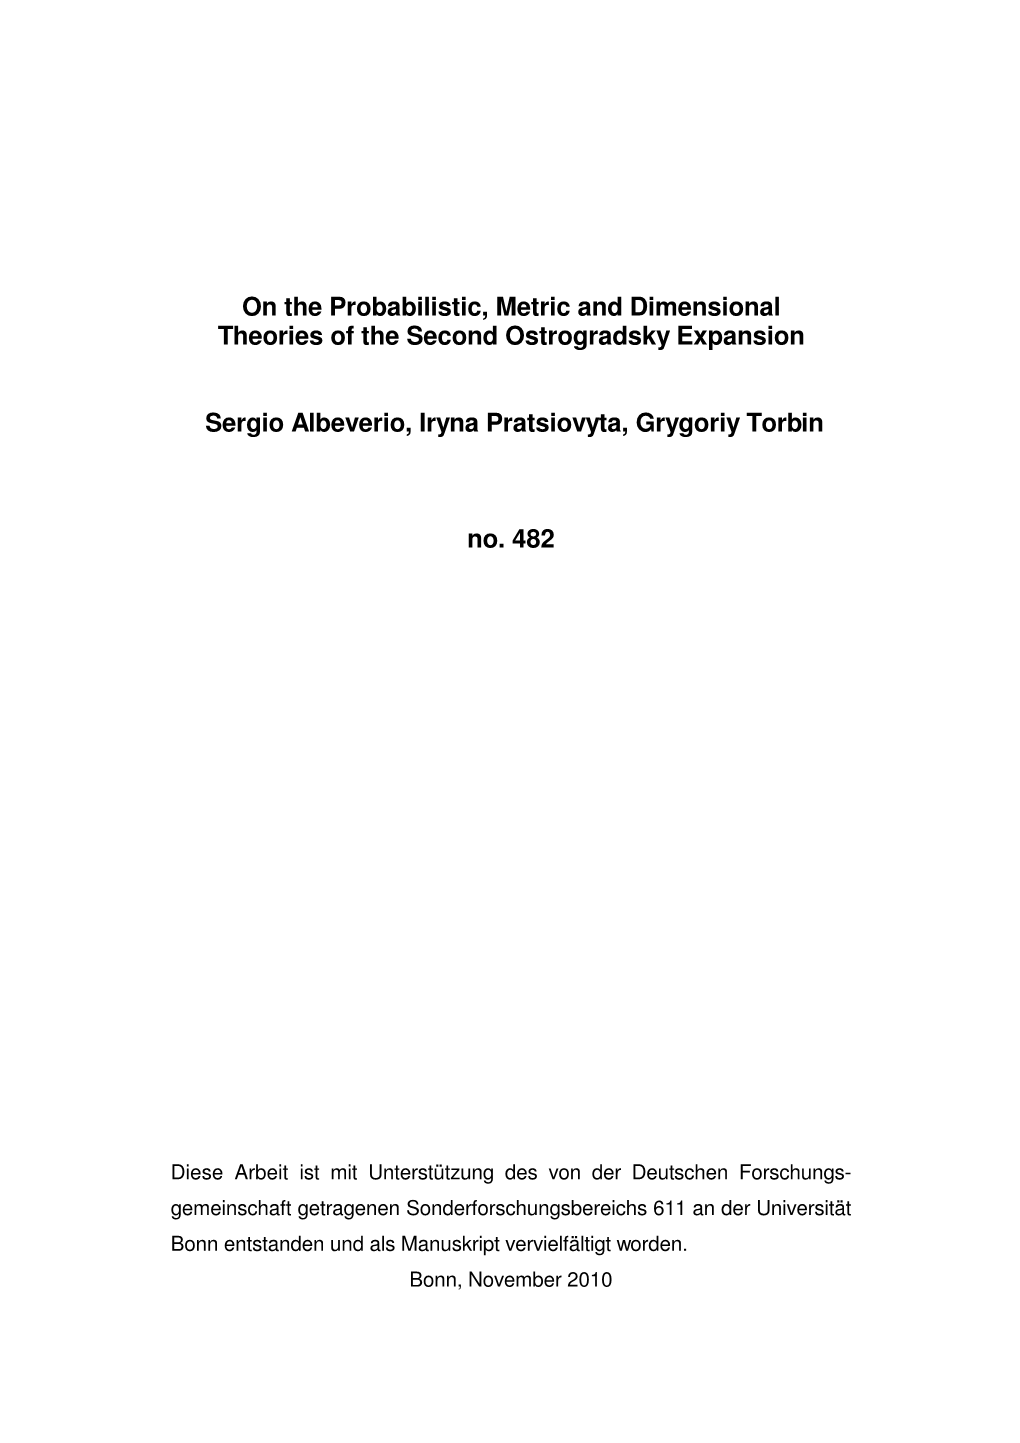 On the Probabilistic, Metric and Dimensional Theories of the Second Ostrogradsky Expansion